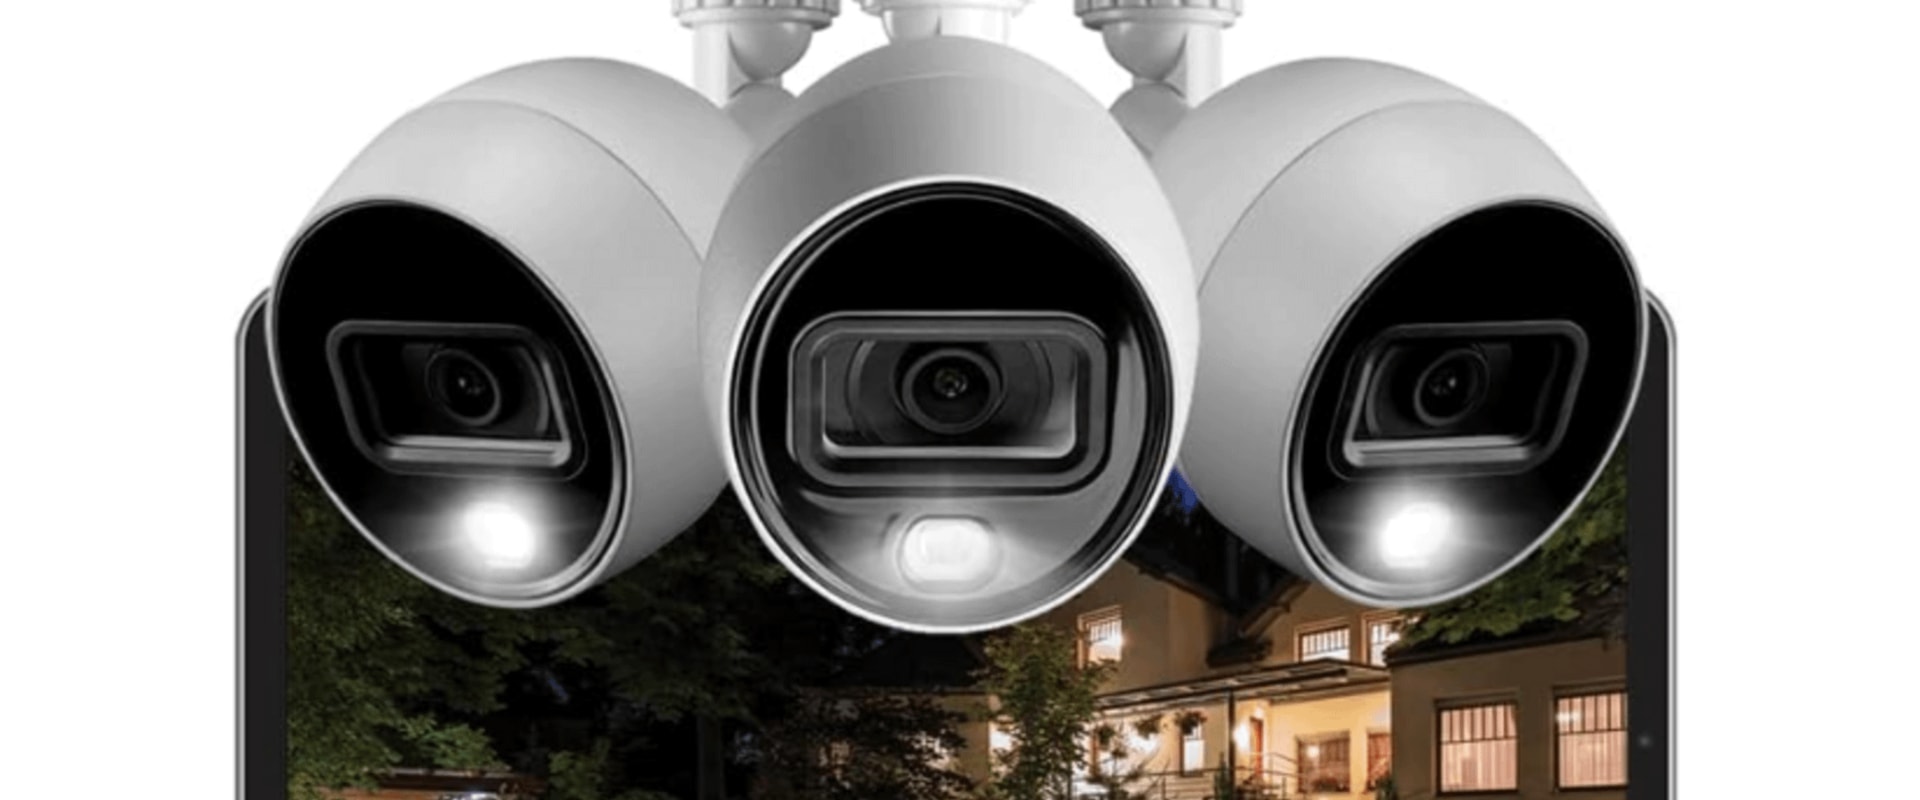 Night Vision Outdoor Business Security Cameras: A Complete Overview